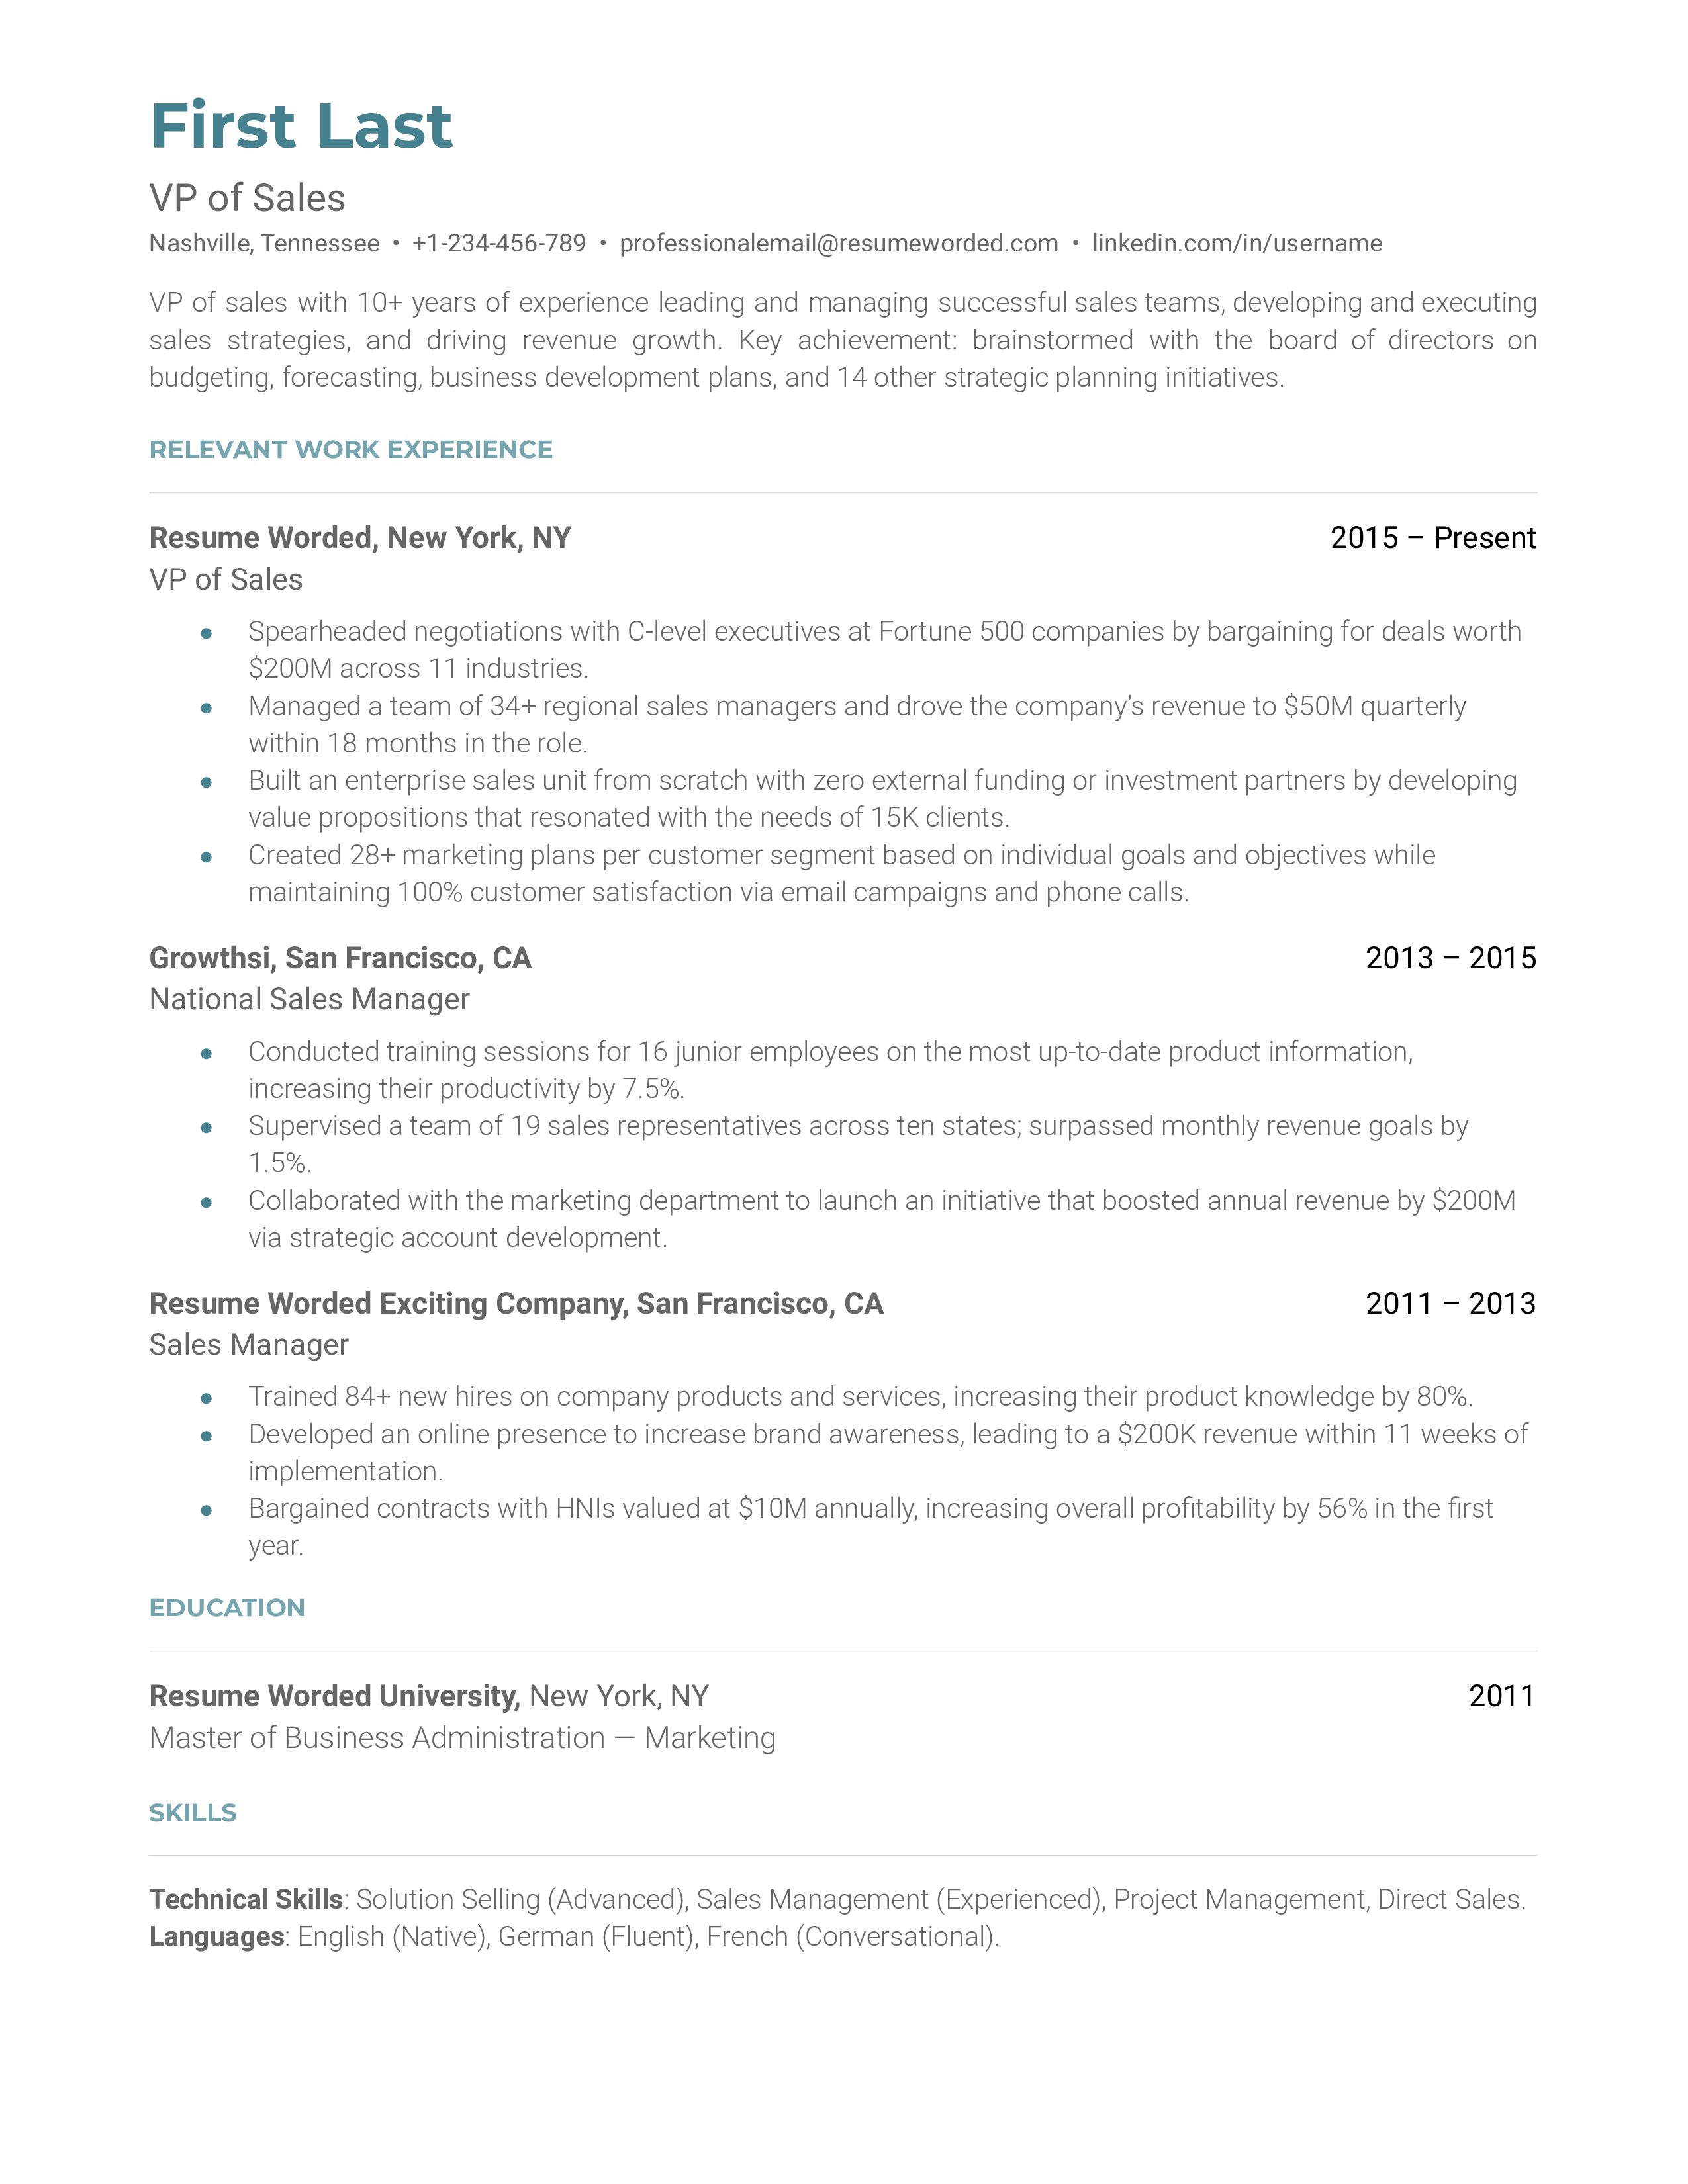 A VP of sales resume sample that highlights the applicant’s management experience and success.